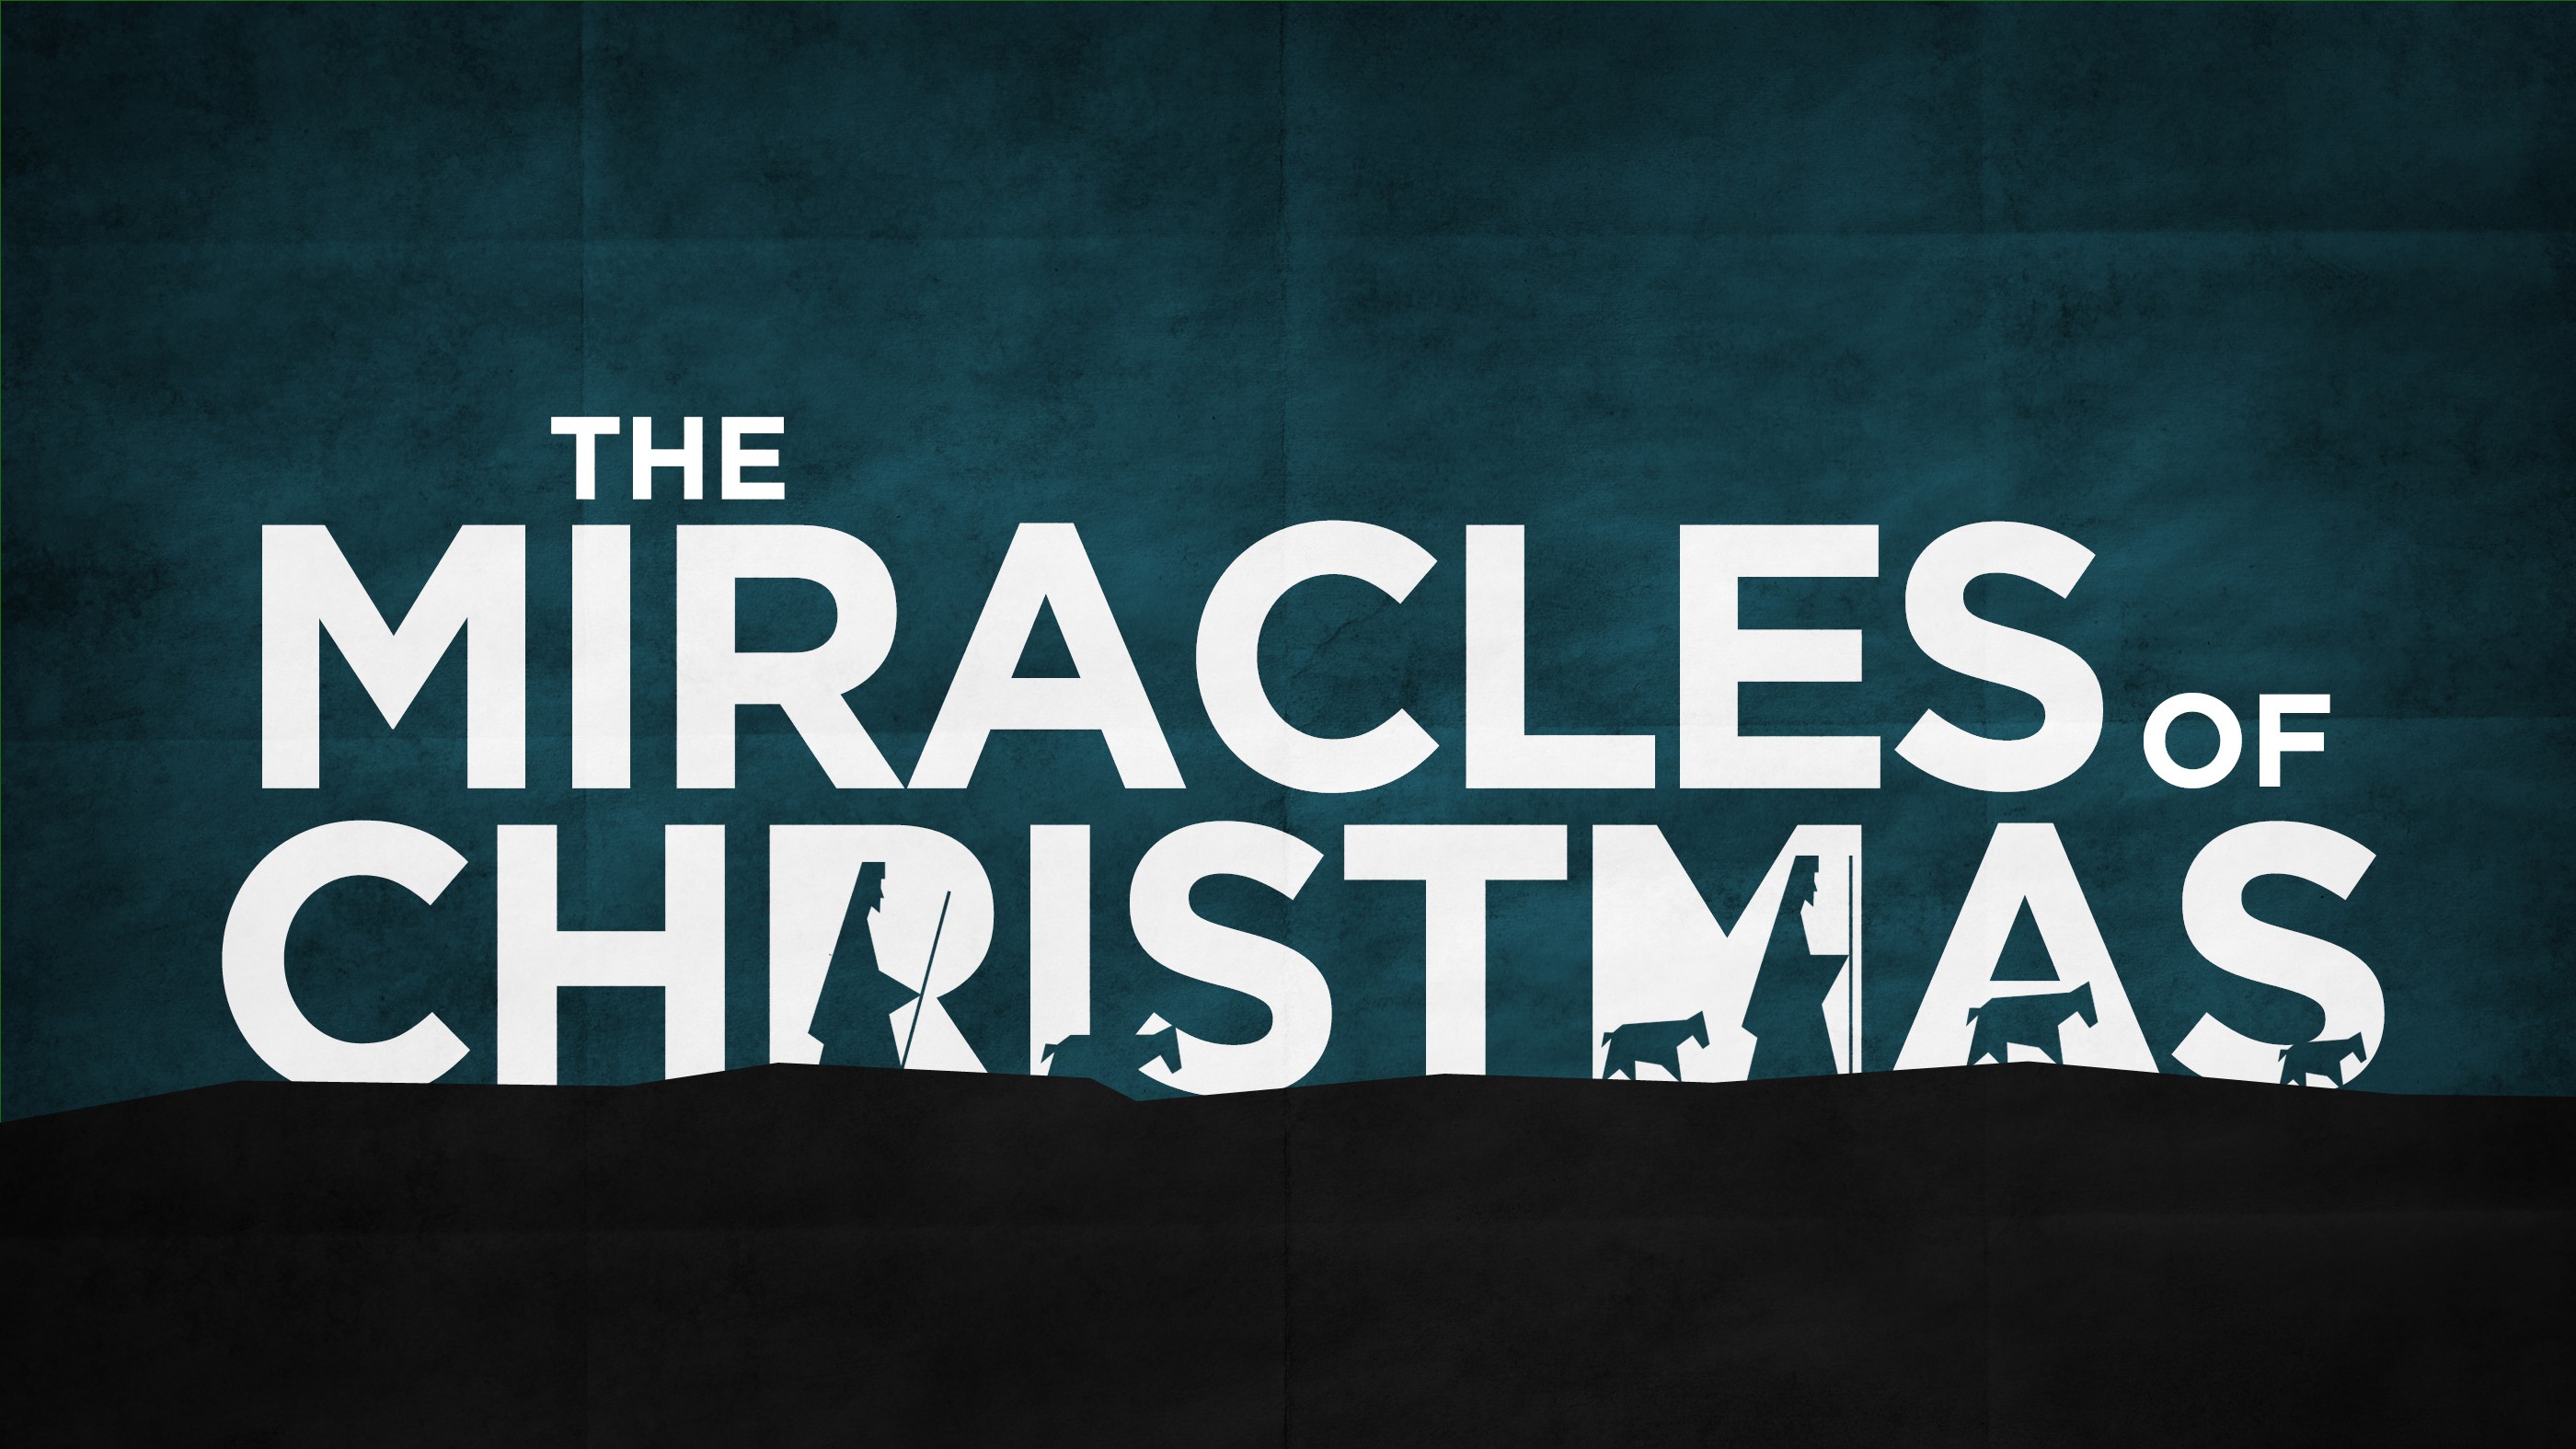 The Miracles of Christmas